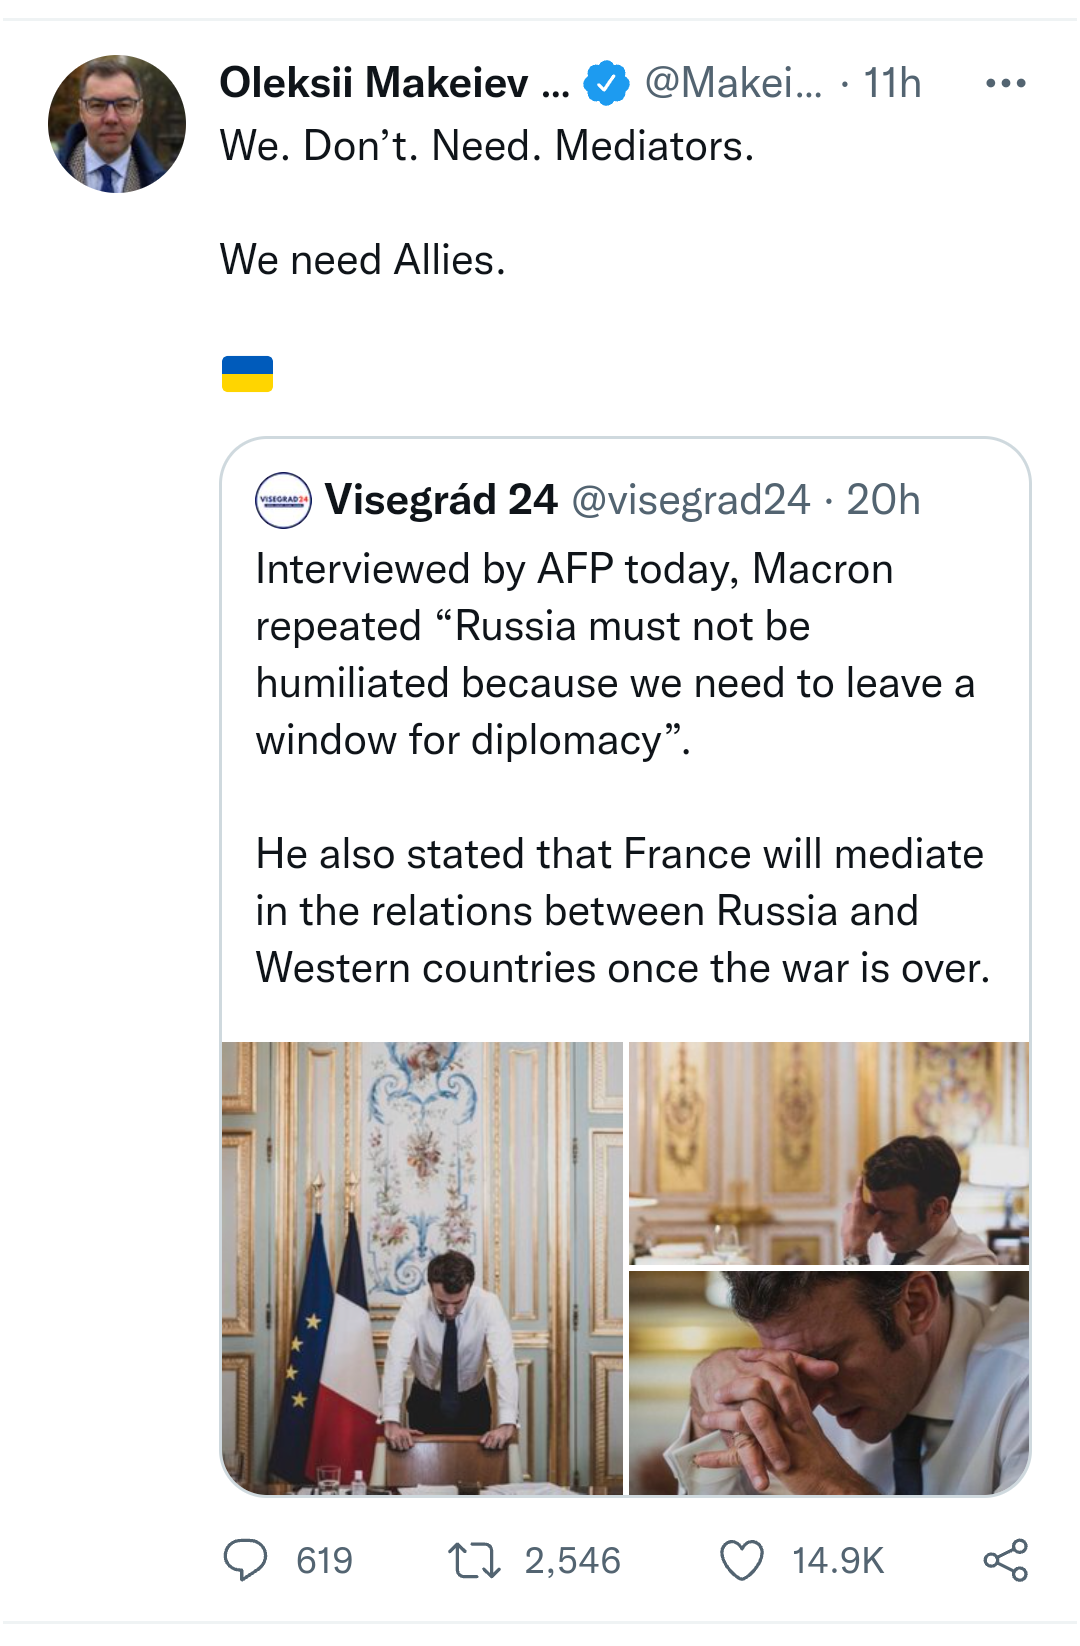 "Calls to avoid humiliation of Russia can only humiliate France" - Ukraine slams French president Macron for saying Russia should not be humiliated, &#8220;Calls to avoid humiliation of Russia can only humiliate France&#8221; &#8211; Ukraine slams French president Macron for saying Russia should not be humiliated, INFINITY LOADED